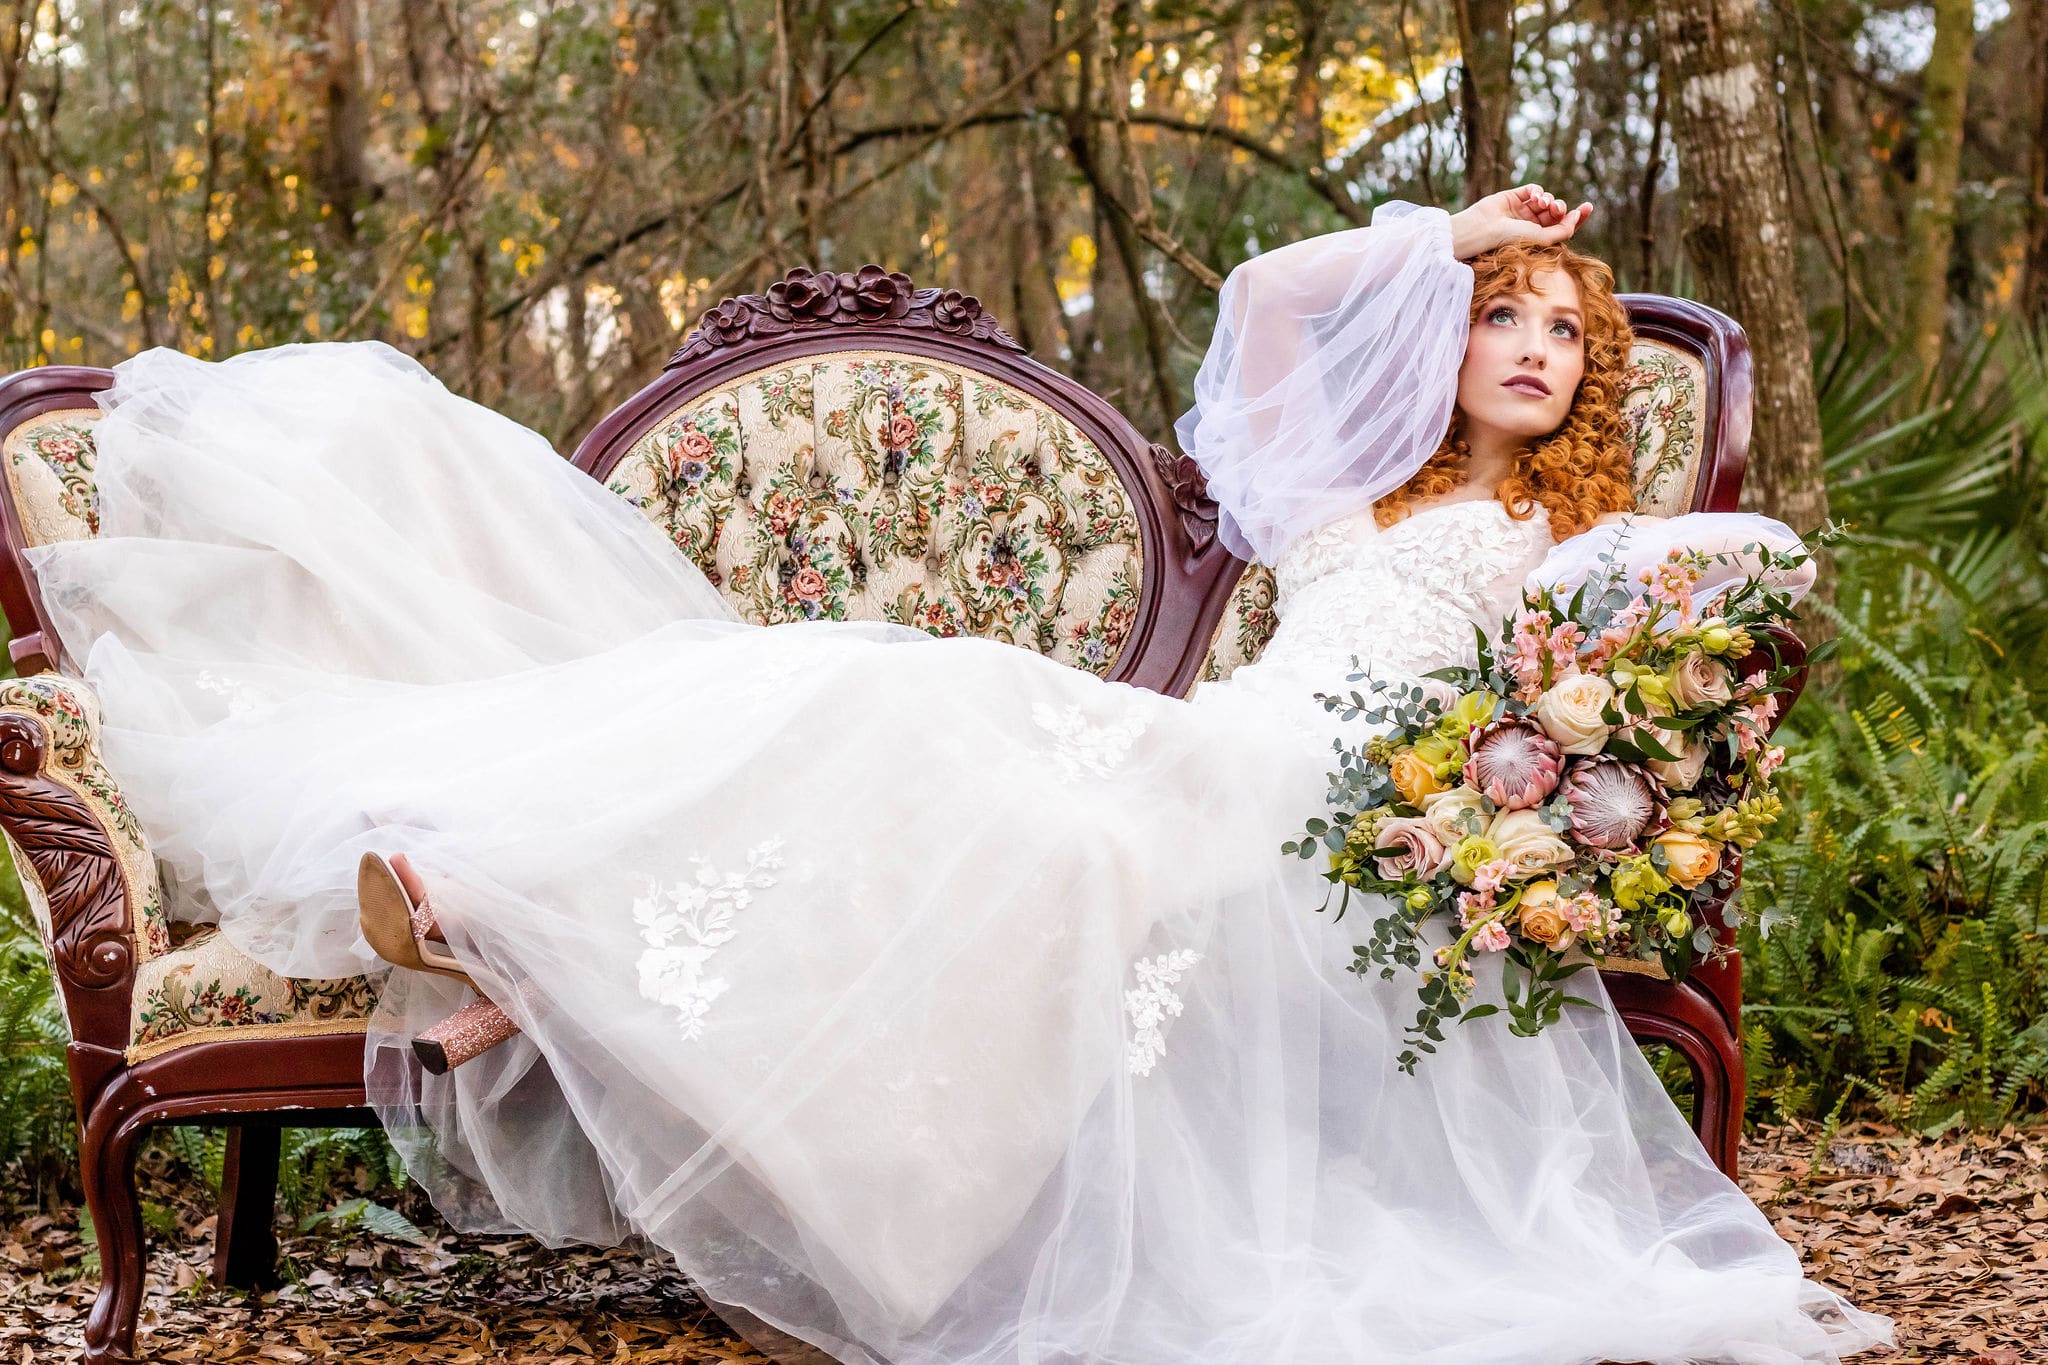 bride in fluffy wedding dress laying on vintage floral couch outside in woodsy area with hand on head and bouquet beside her